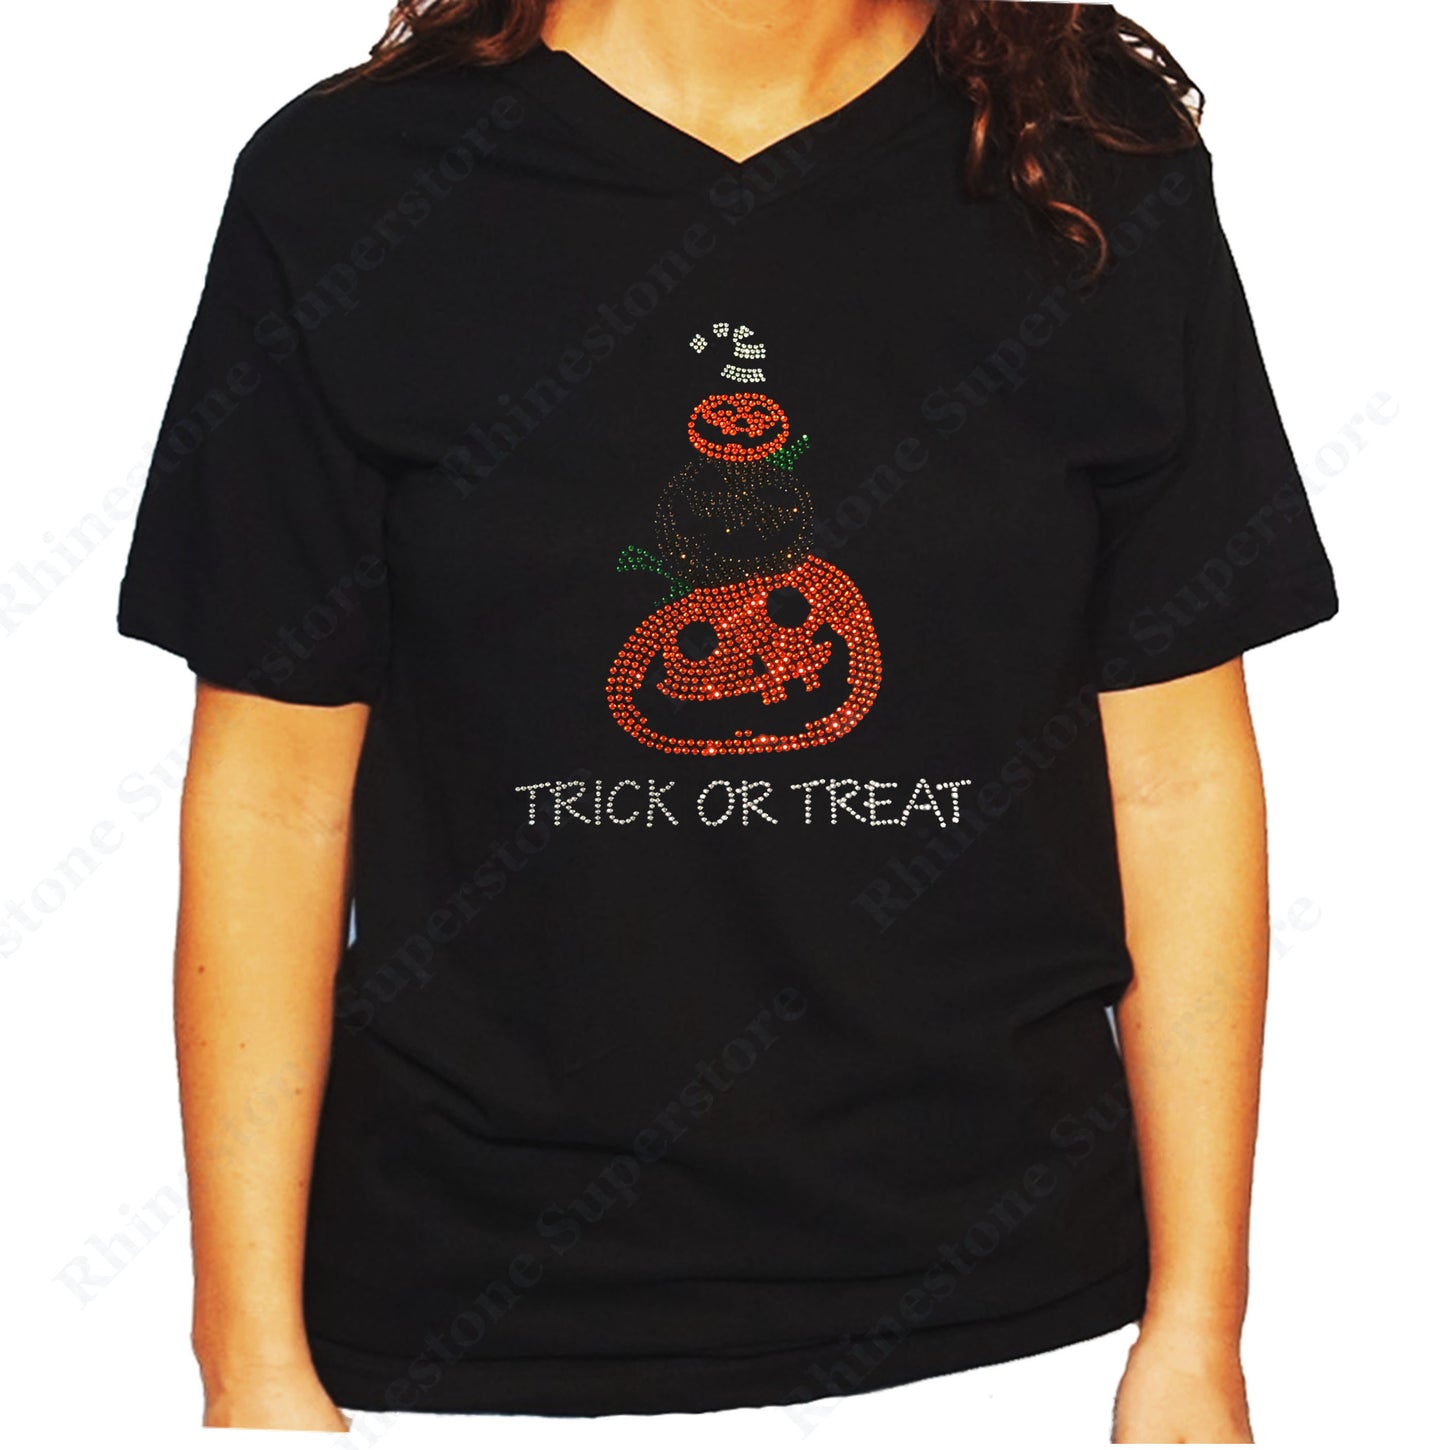 Women's / Unisex T-Shirt with Halloween Pumpkins with Trick or Treat in Rhinestones